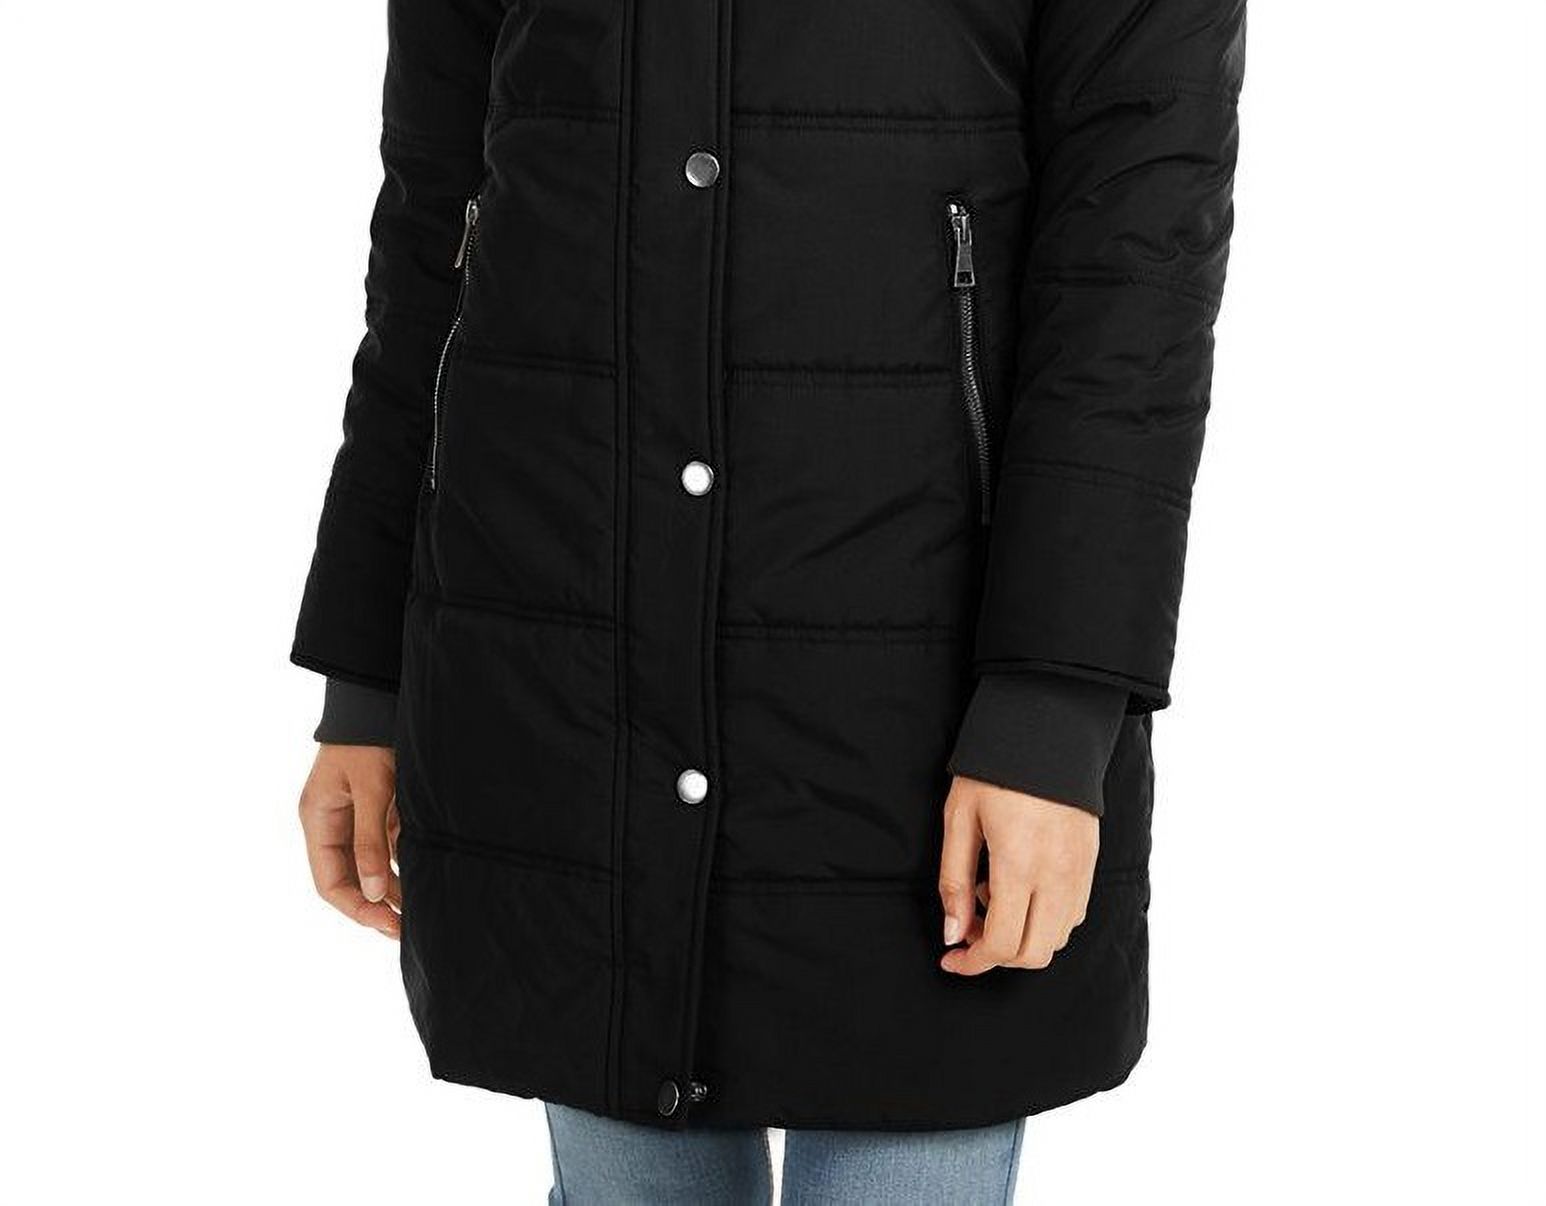 MARALYN & ME Womens Black Faux Fur Pocketed Hooded Zippered Puffer Winter Jacket Coat Juniors XS - image 3 of 3